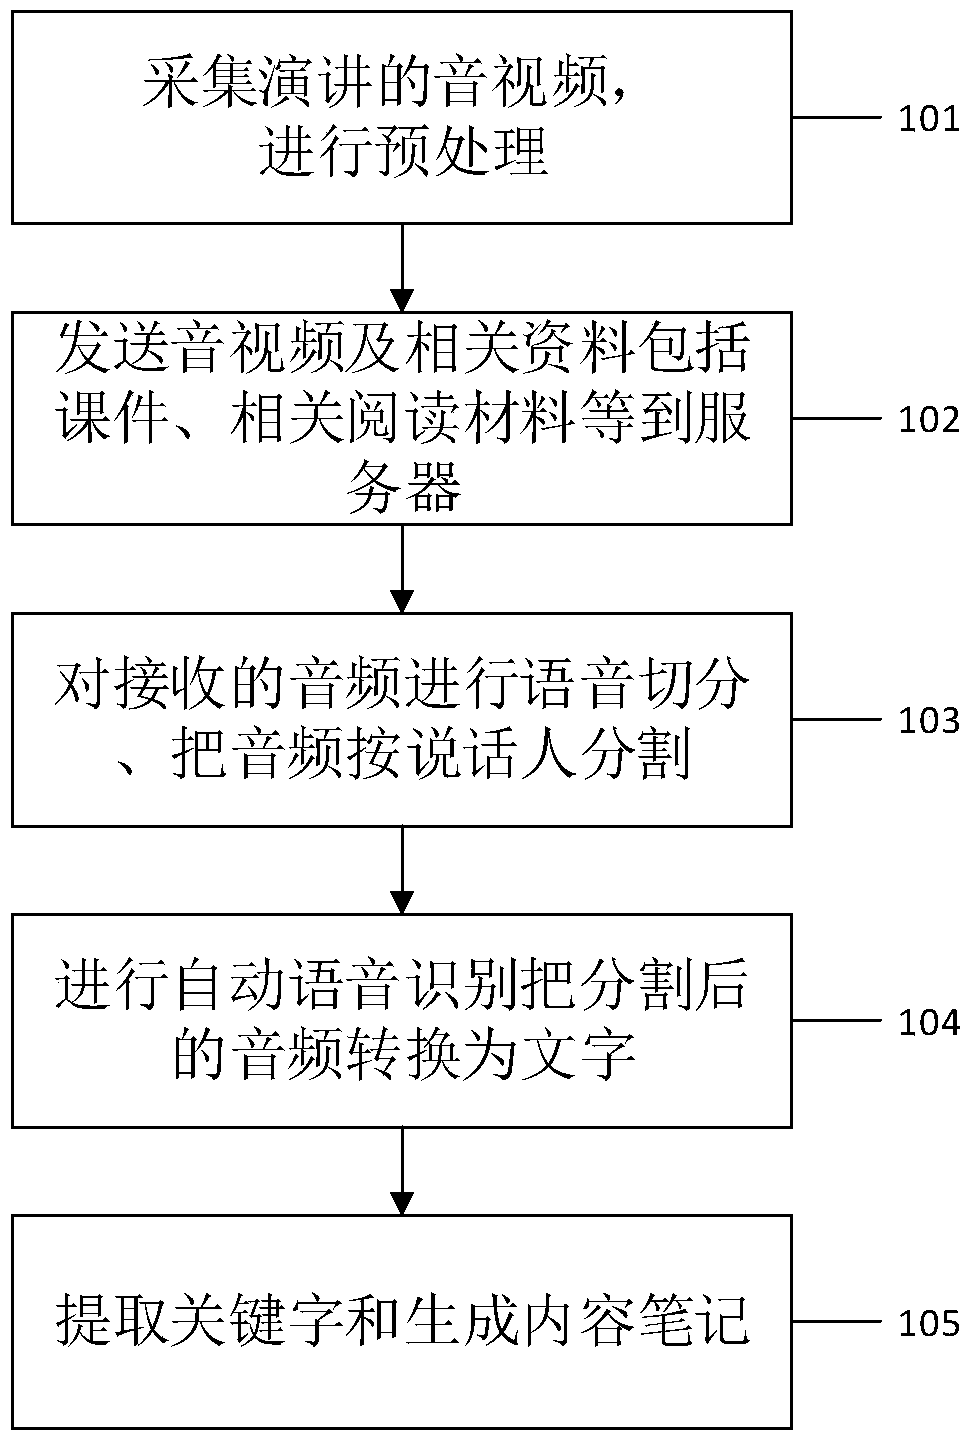 Method and device for extracting speech content based on cloud platform